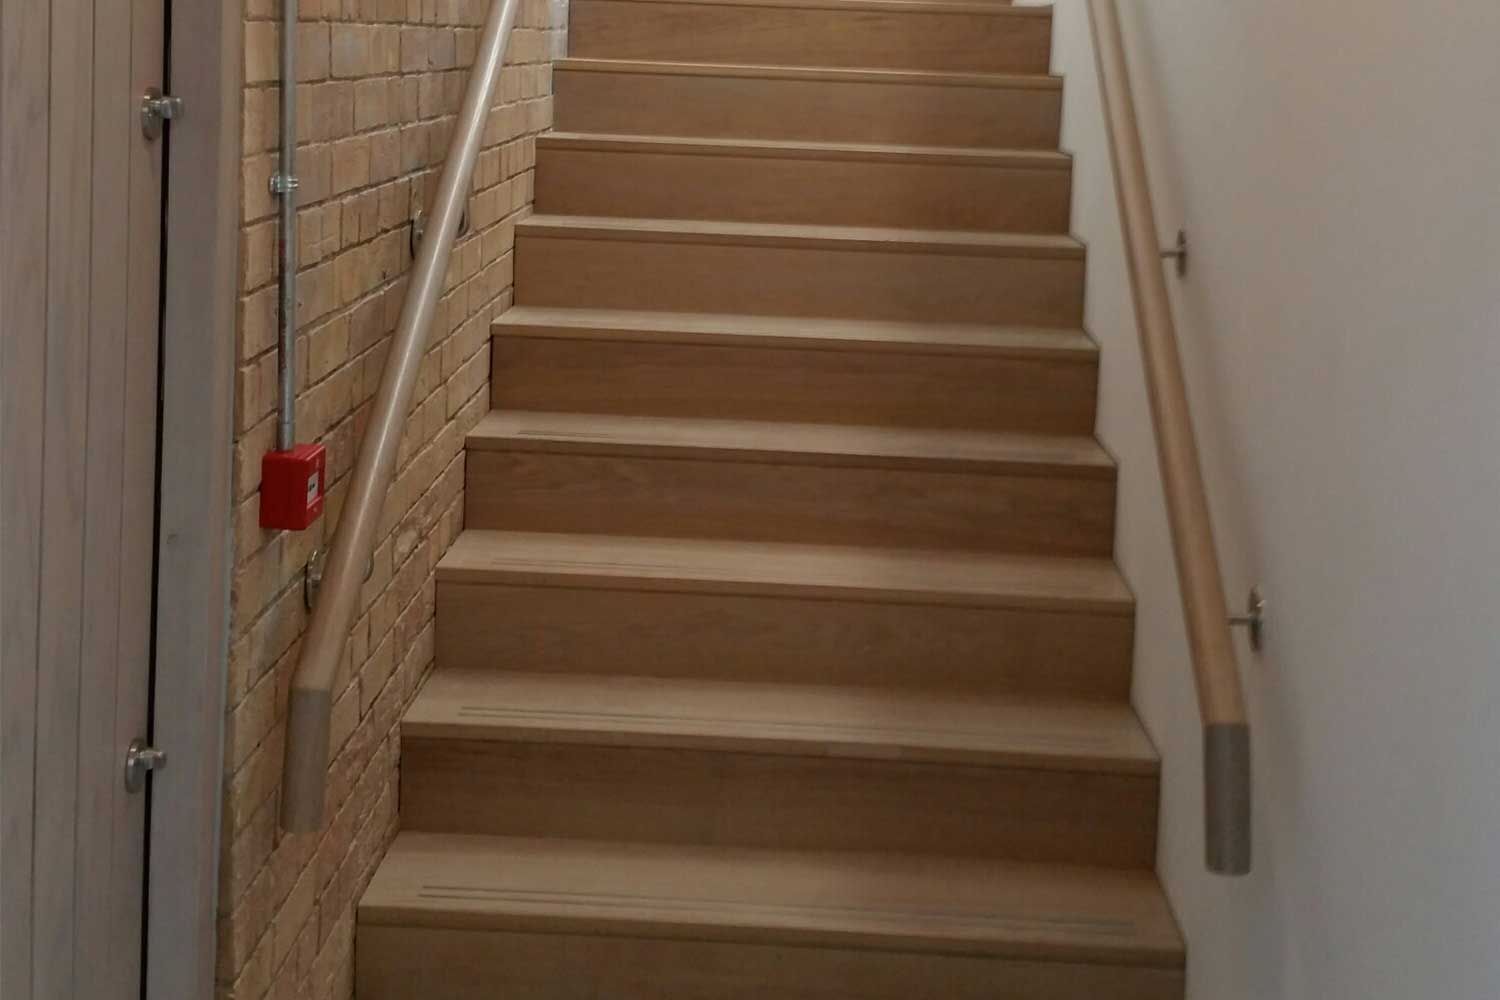 OMC Technologies - Feature stairs and flood prevention barriers at Sir John Rogerson's Quay